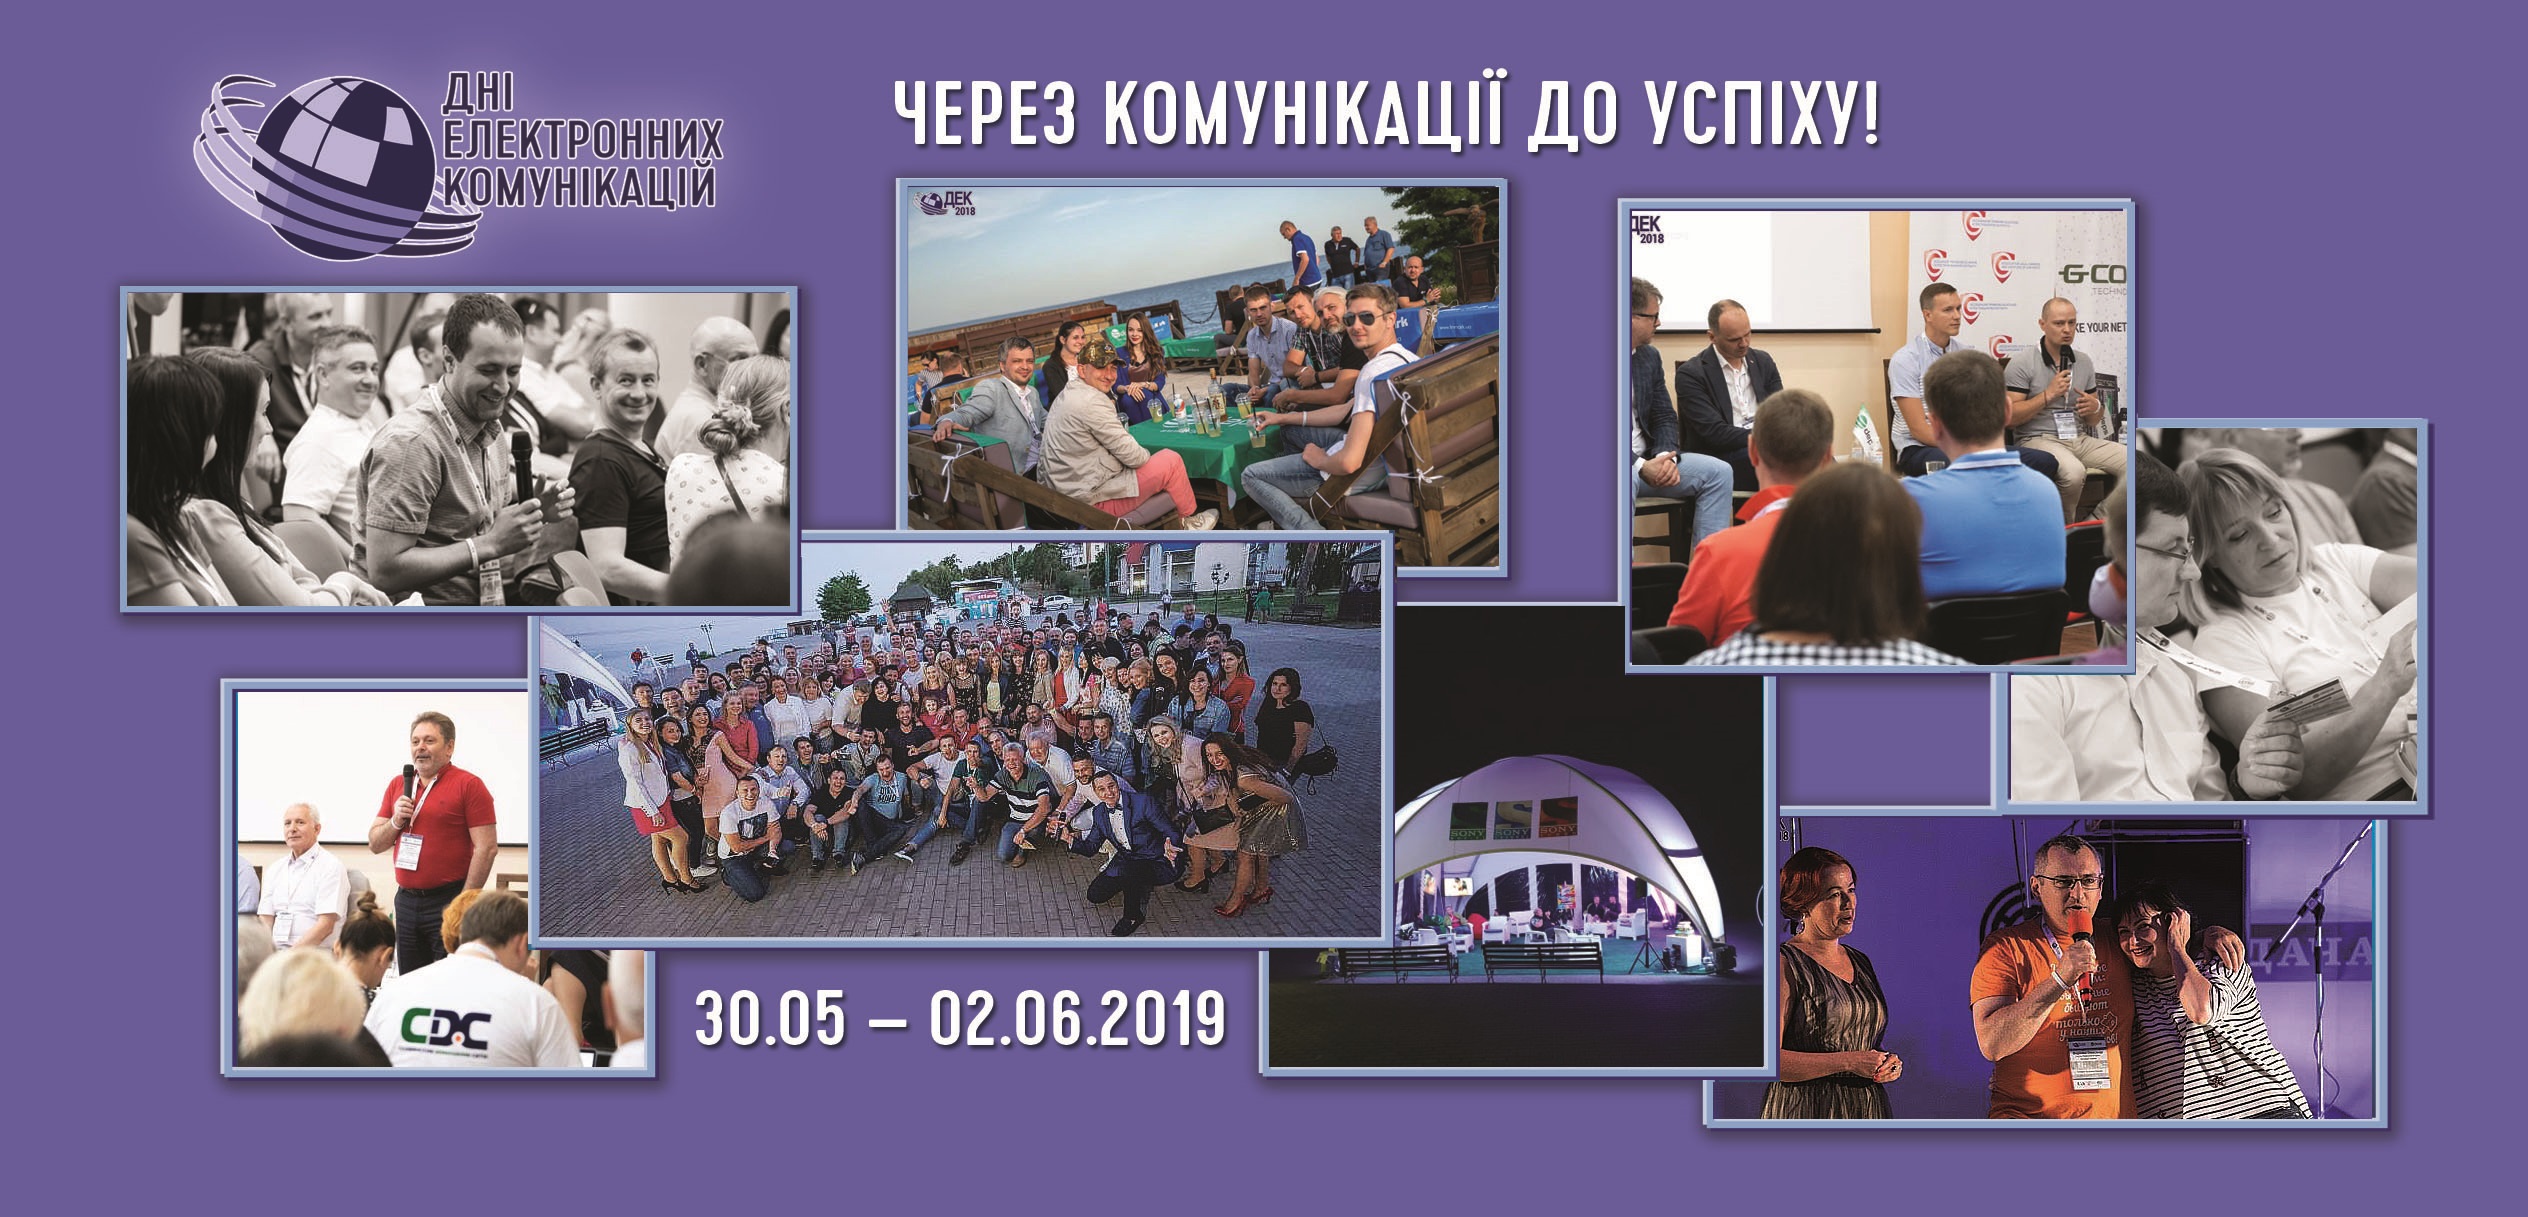 REGISTRATION FOR “DAYS OF ELECTRONIC COMMUNICATIONS-2019” HAS BEEN STARTED